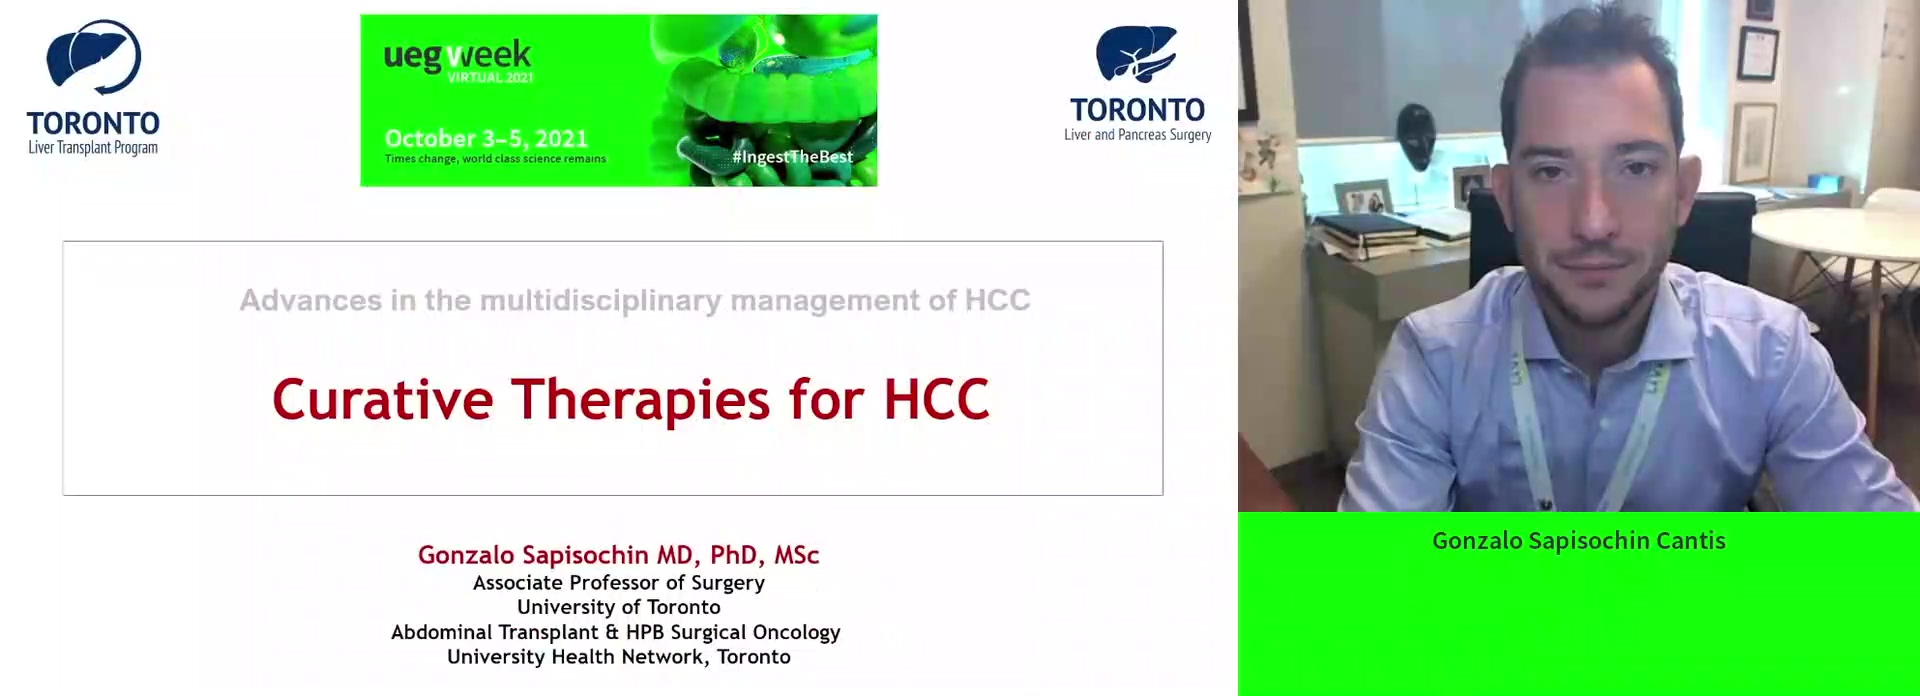 Curative therapies for HCC